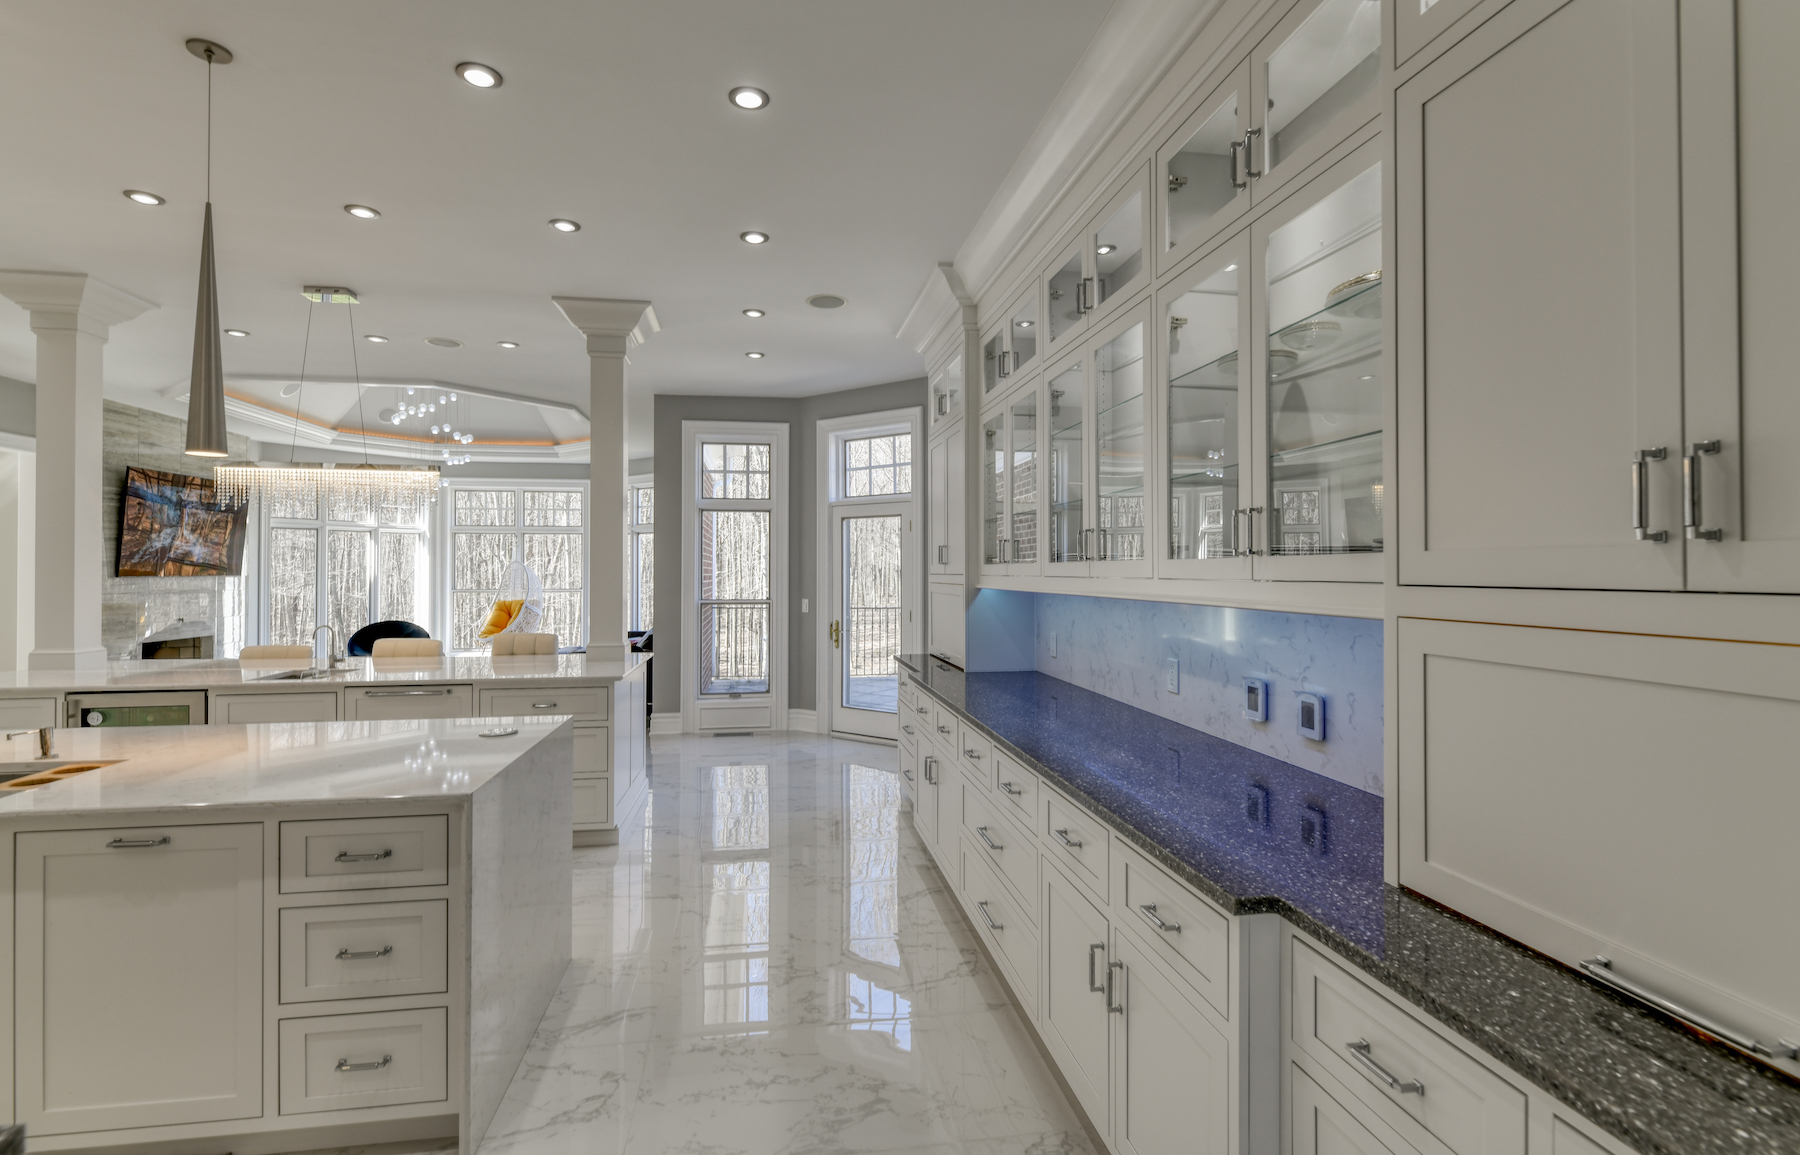 Kitchen of your dreams